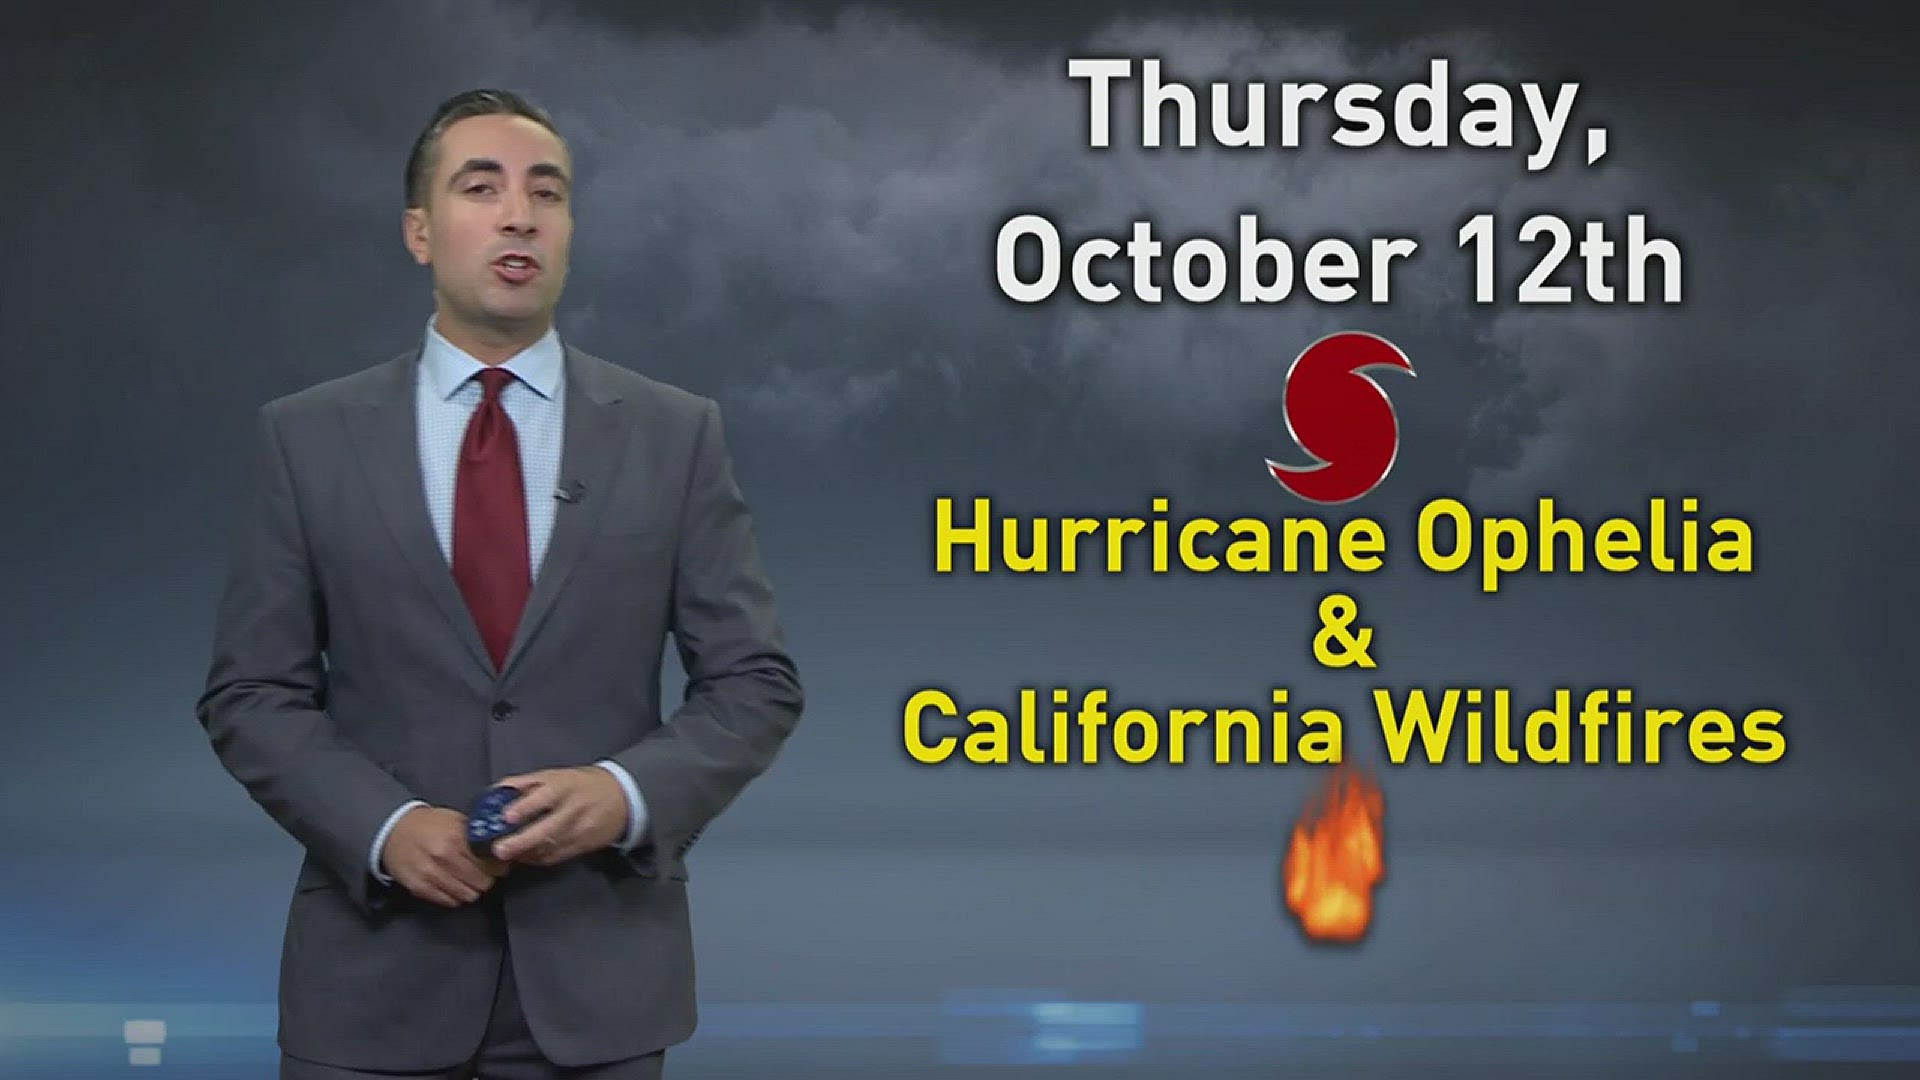 13News Now Meteorologist Tim Pandajis has an updated in the tropics on Hurricane Ophelia, and also the burning wildfires in California.